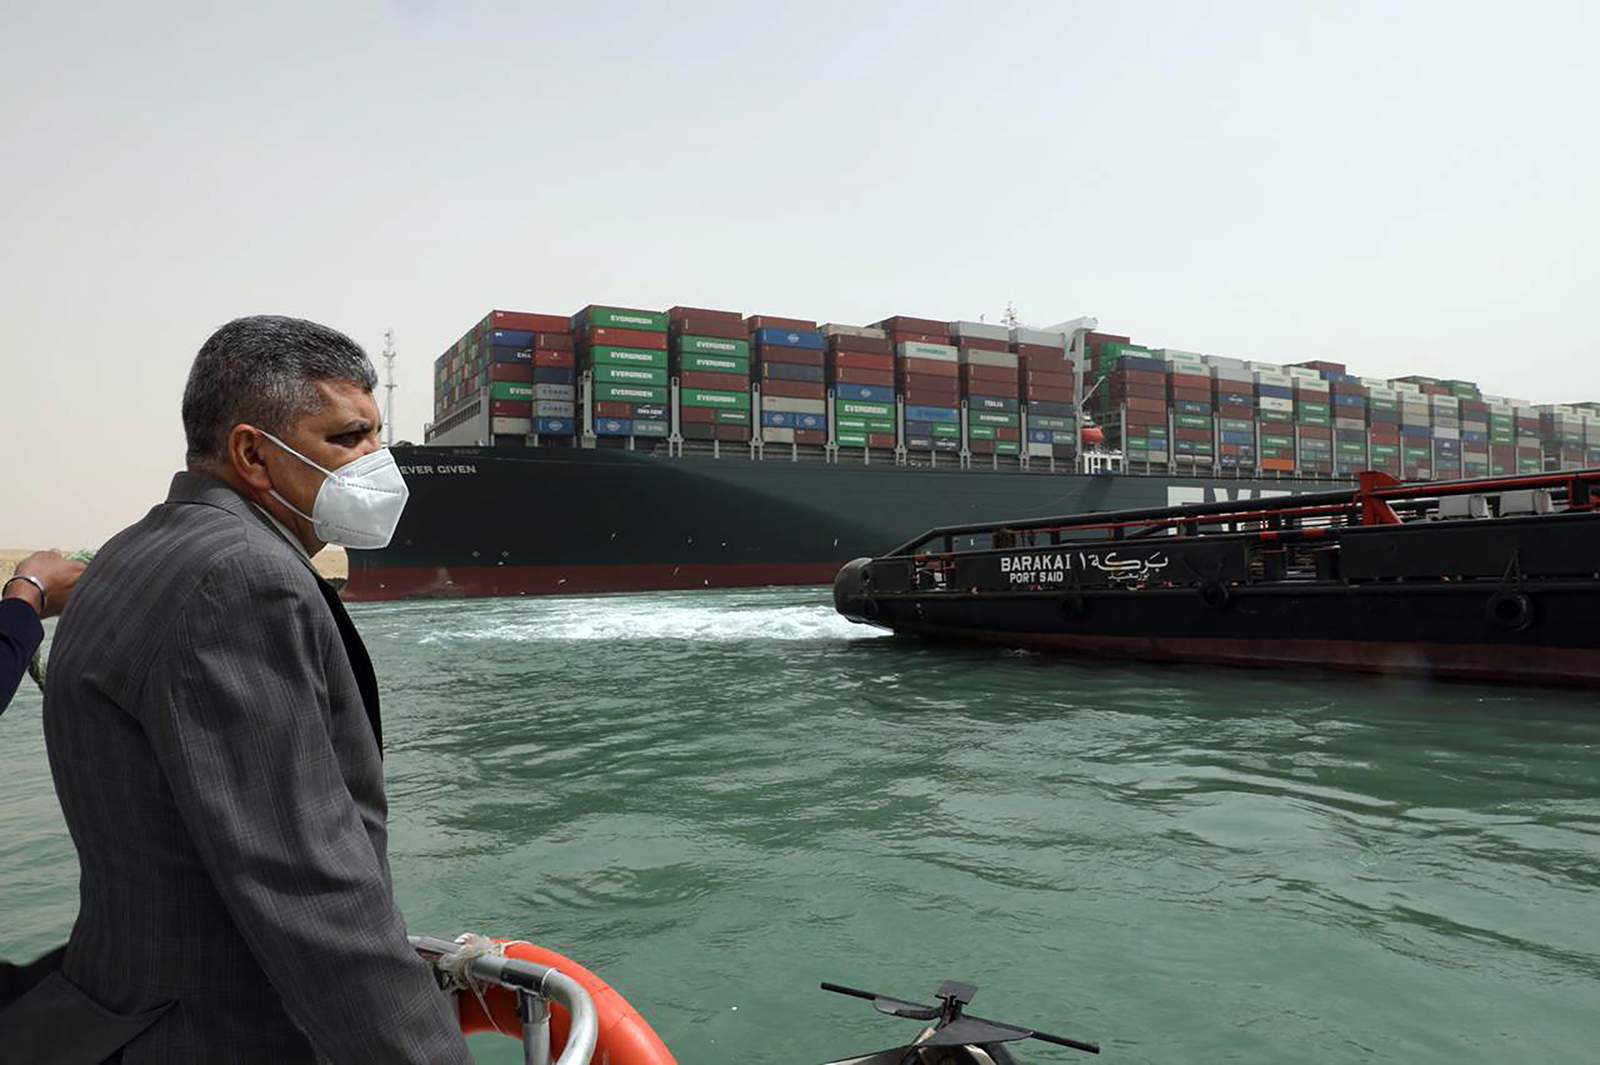 EXPLAINER: What we know about a ship blocking the Suez Canal